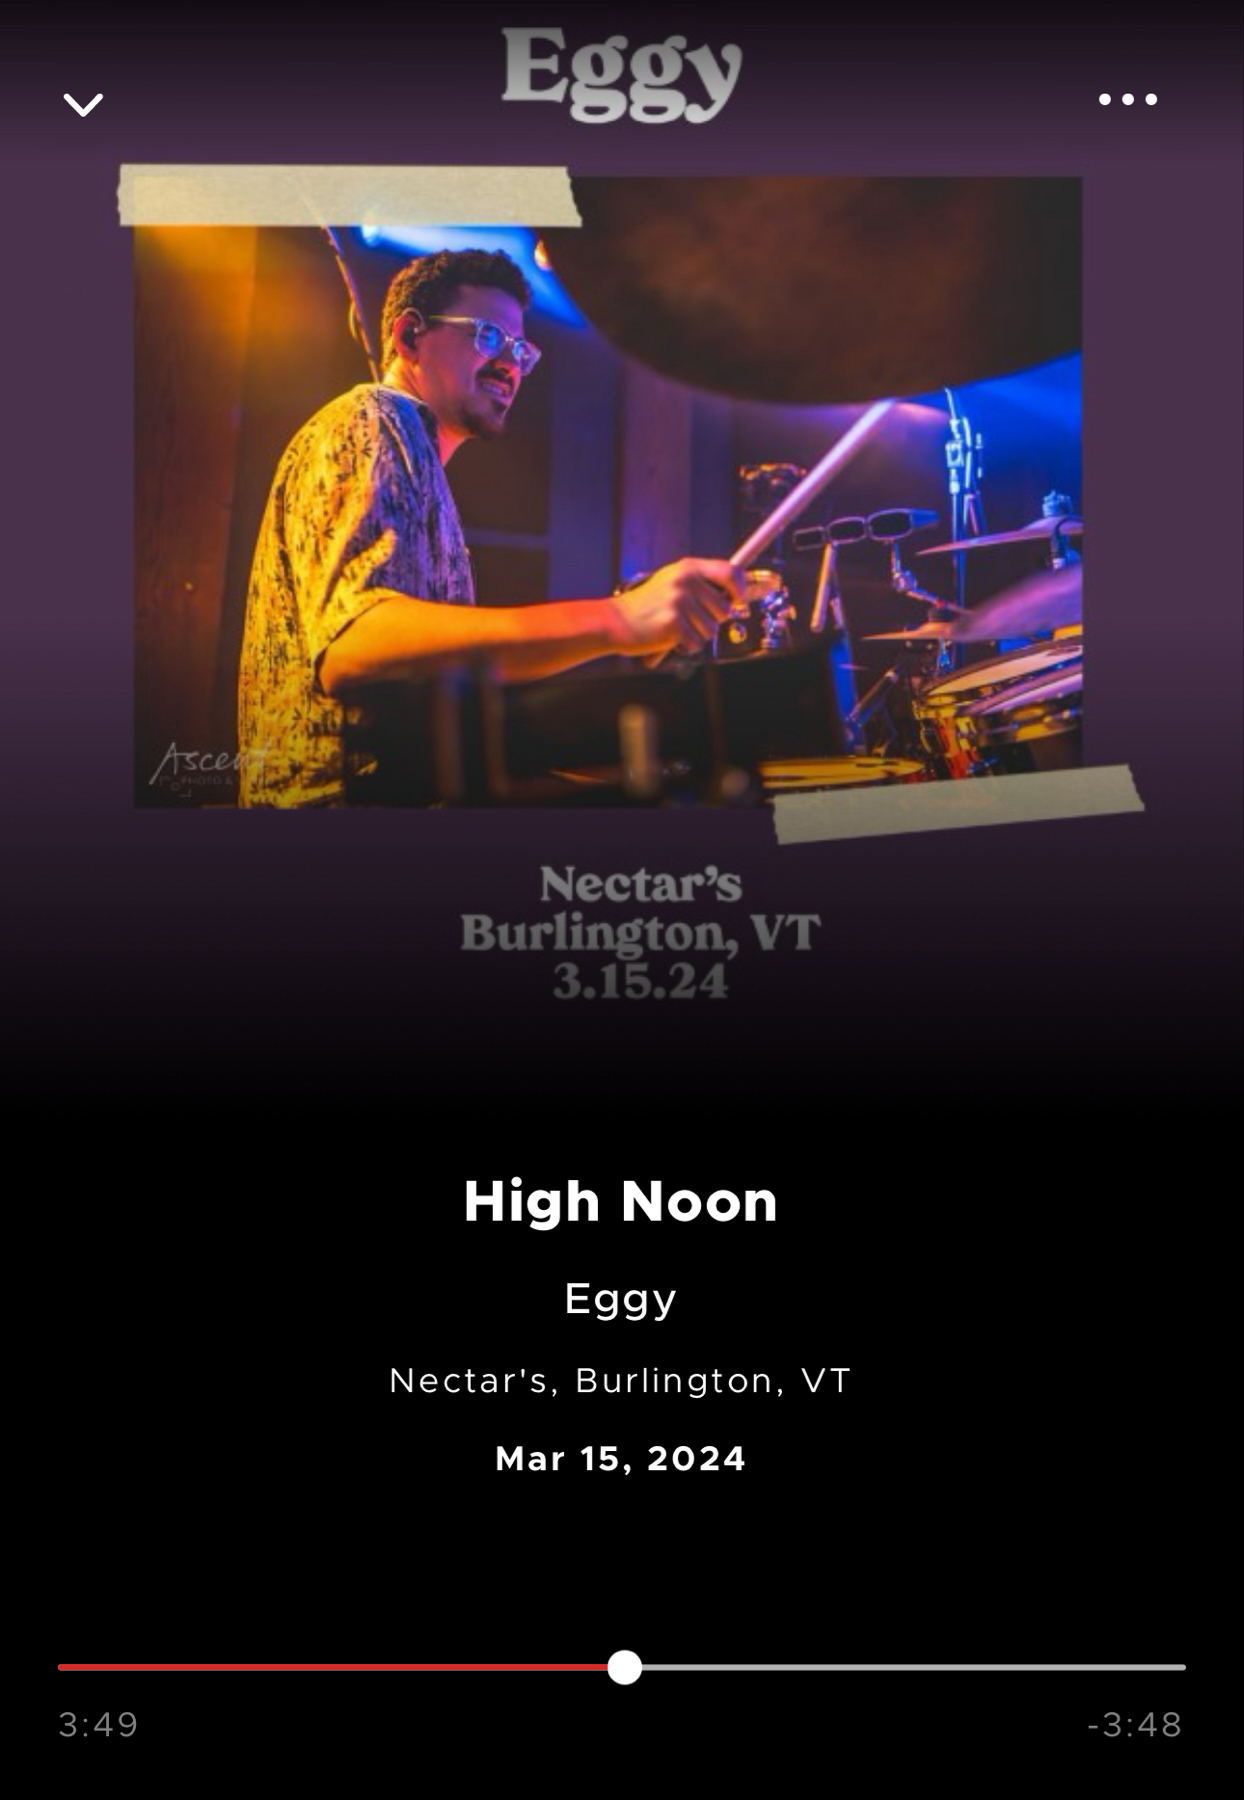 The image displays a media player with a photo of a male drummer in performance. The overlaying text reads “Eggy, High Noon, Nectar’s, Burlington, VT, Mar 15, 2024.” The playback timeline is paused